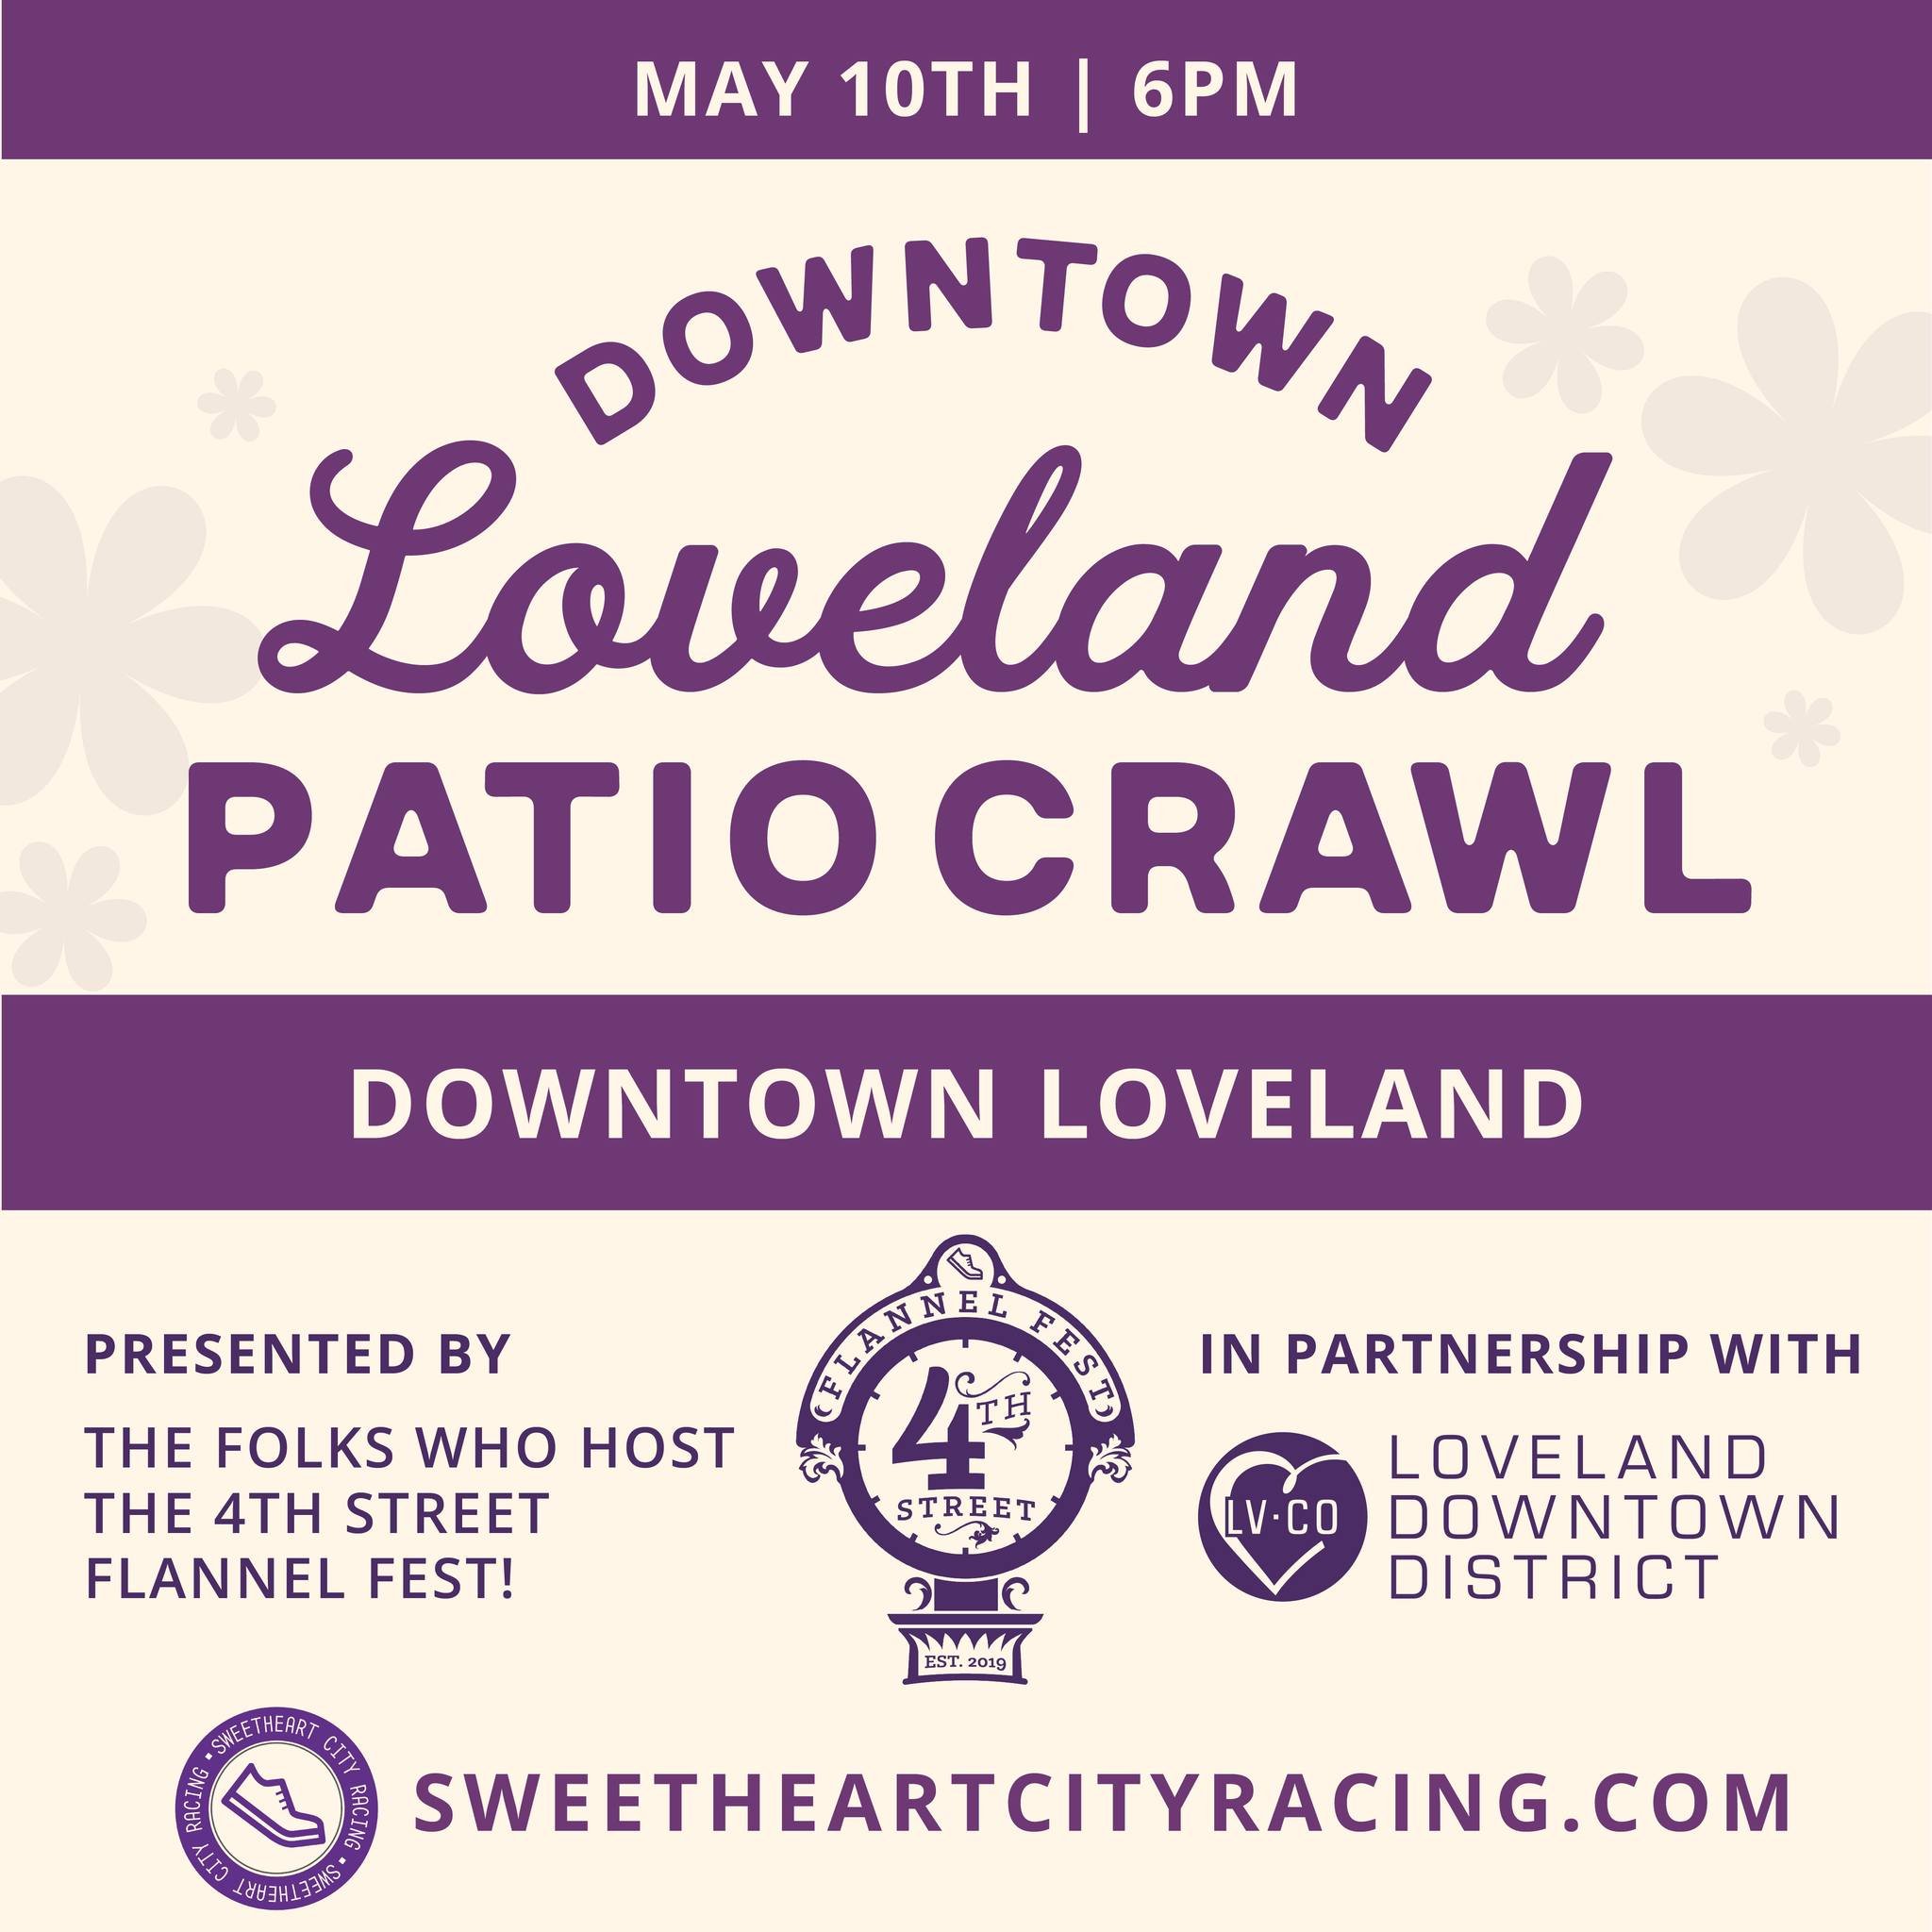 🚨 New Event! You won't want to miss this Downtown Loveland Patio Crawl hosted by @sweetheartcityracing on May 10th! 
Check out some of Downtown Loveland's finest bars, sip on delicious cocktails and vote on which one served the BEST drink! Grab your